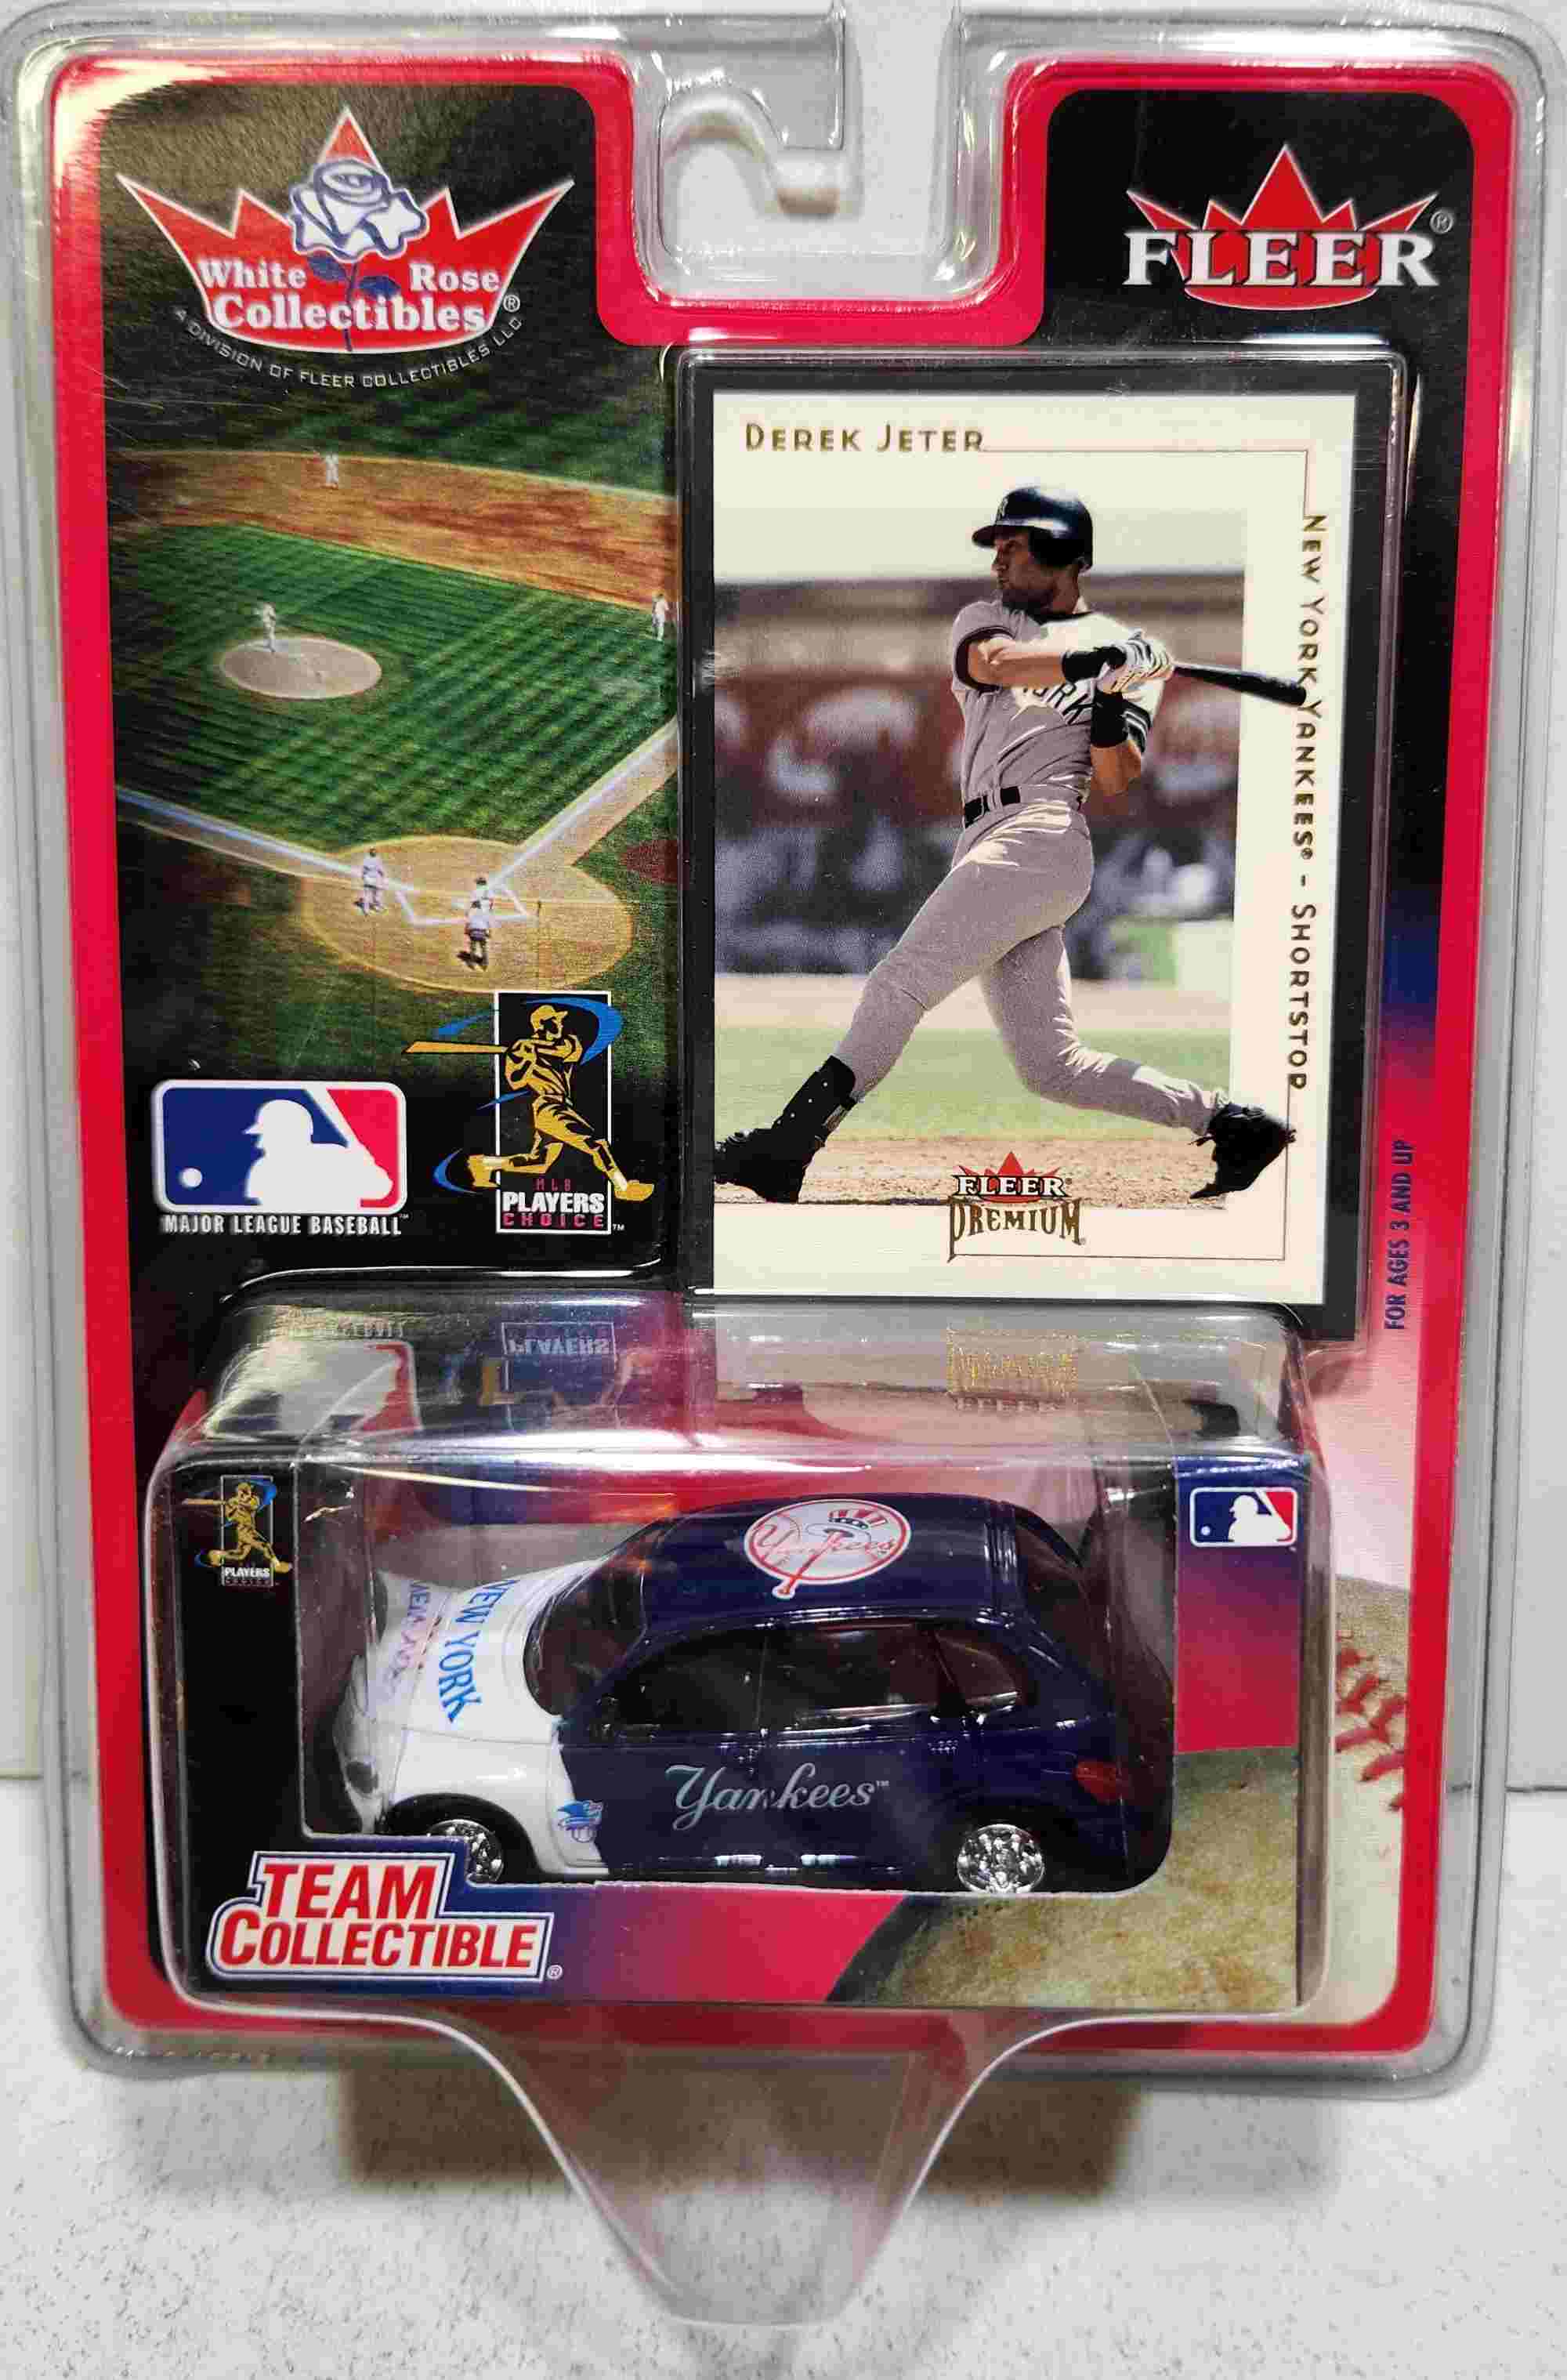 2001 NY Yankees 1/64th PT Cruiser with Derek Jeter trading card